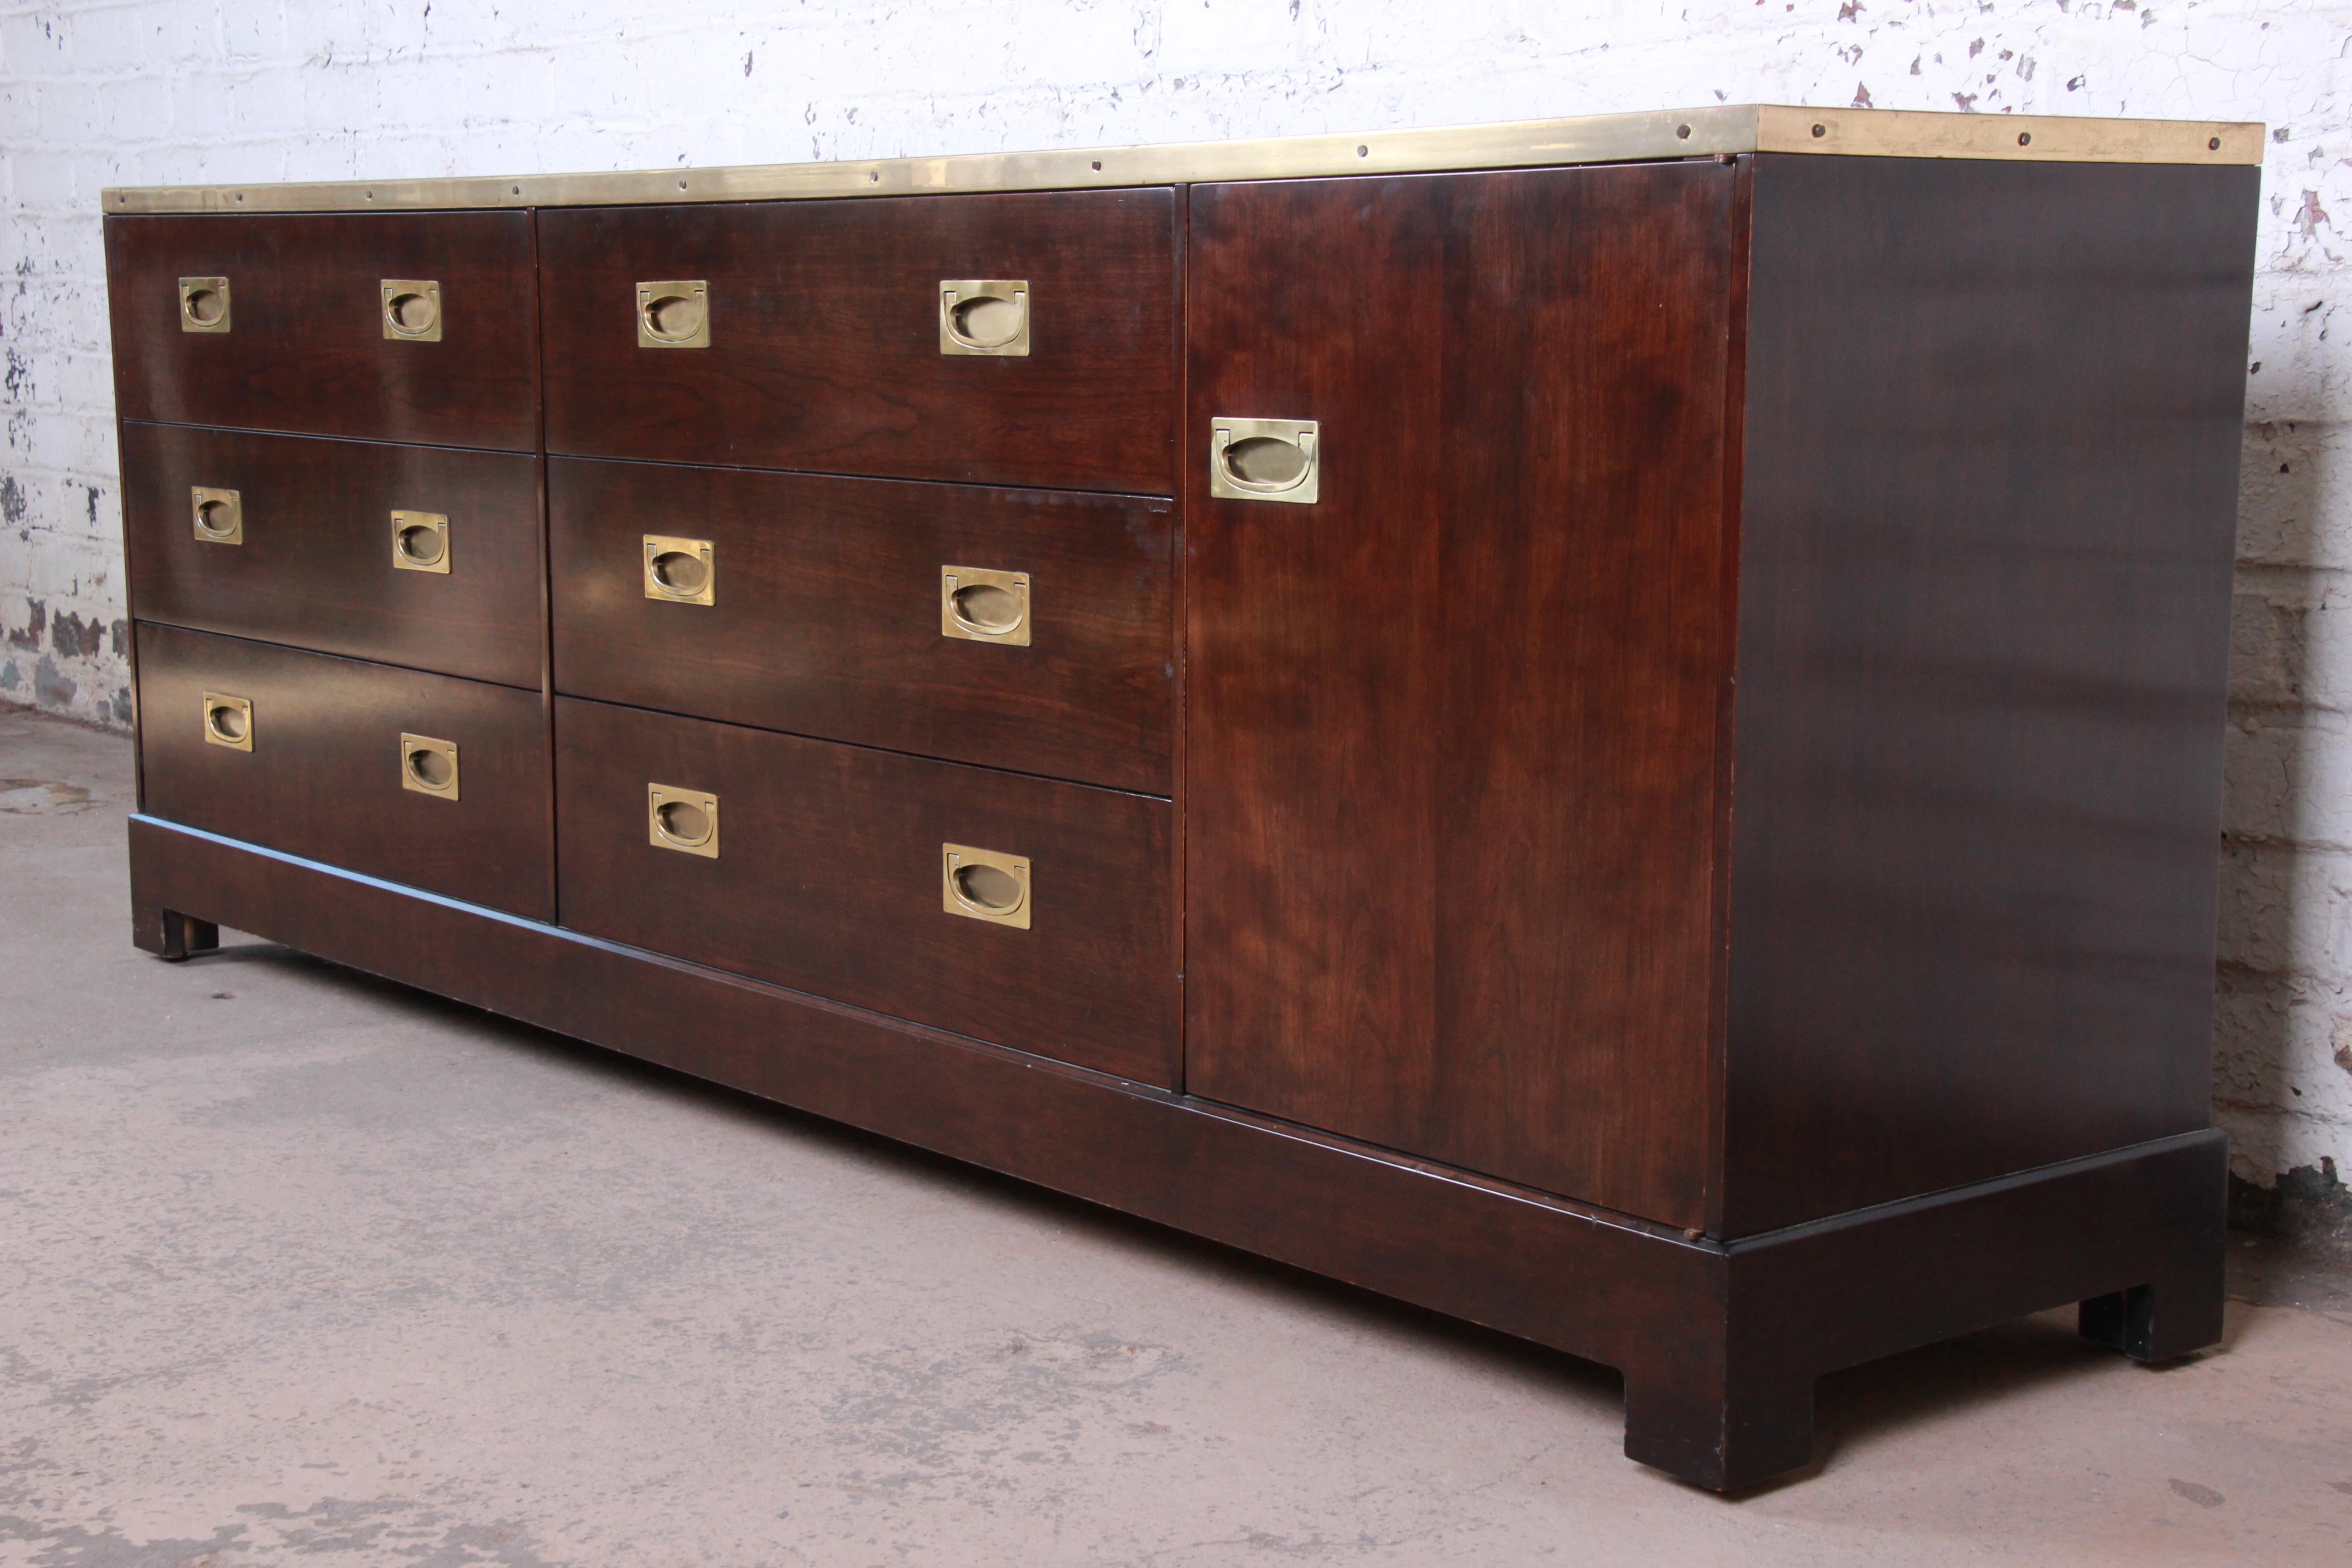 An exceptional Mid-Century Modern Hollywood Regency Campaign style triple dresser or credenza by Milo Baughman for the exclusive Custom collection for Directional. The credenza features rich wood grain with elegant brass trim and original brass